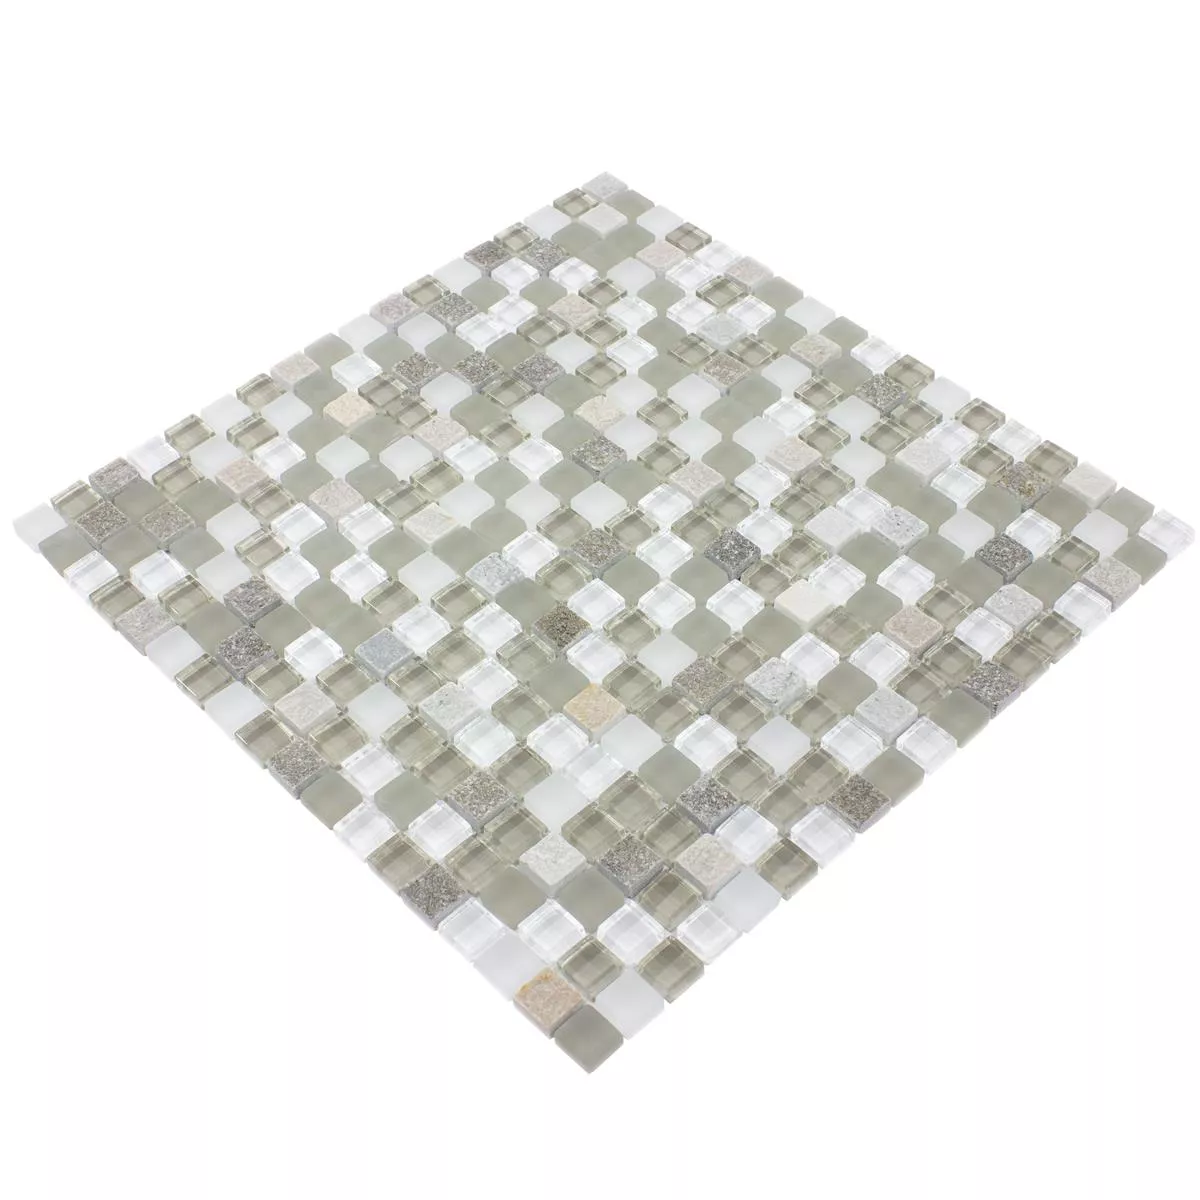 Glass Mosaic Tiles Delicias Glass Natural Stone Mix